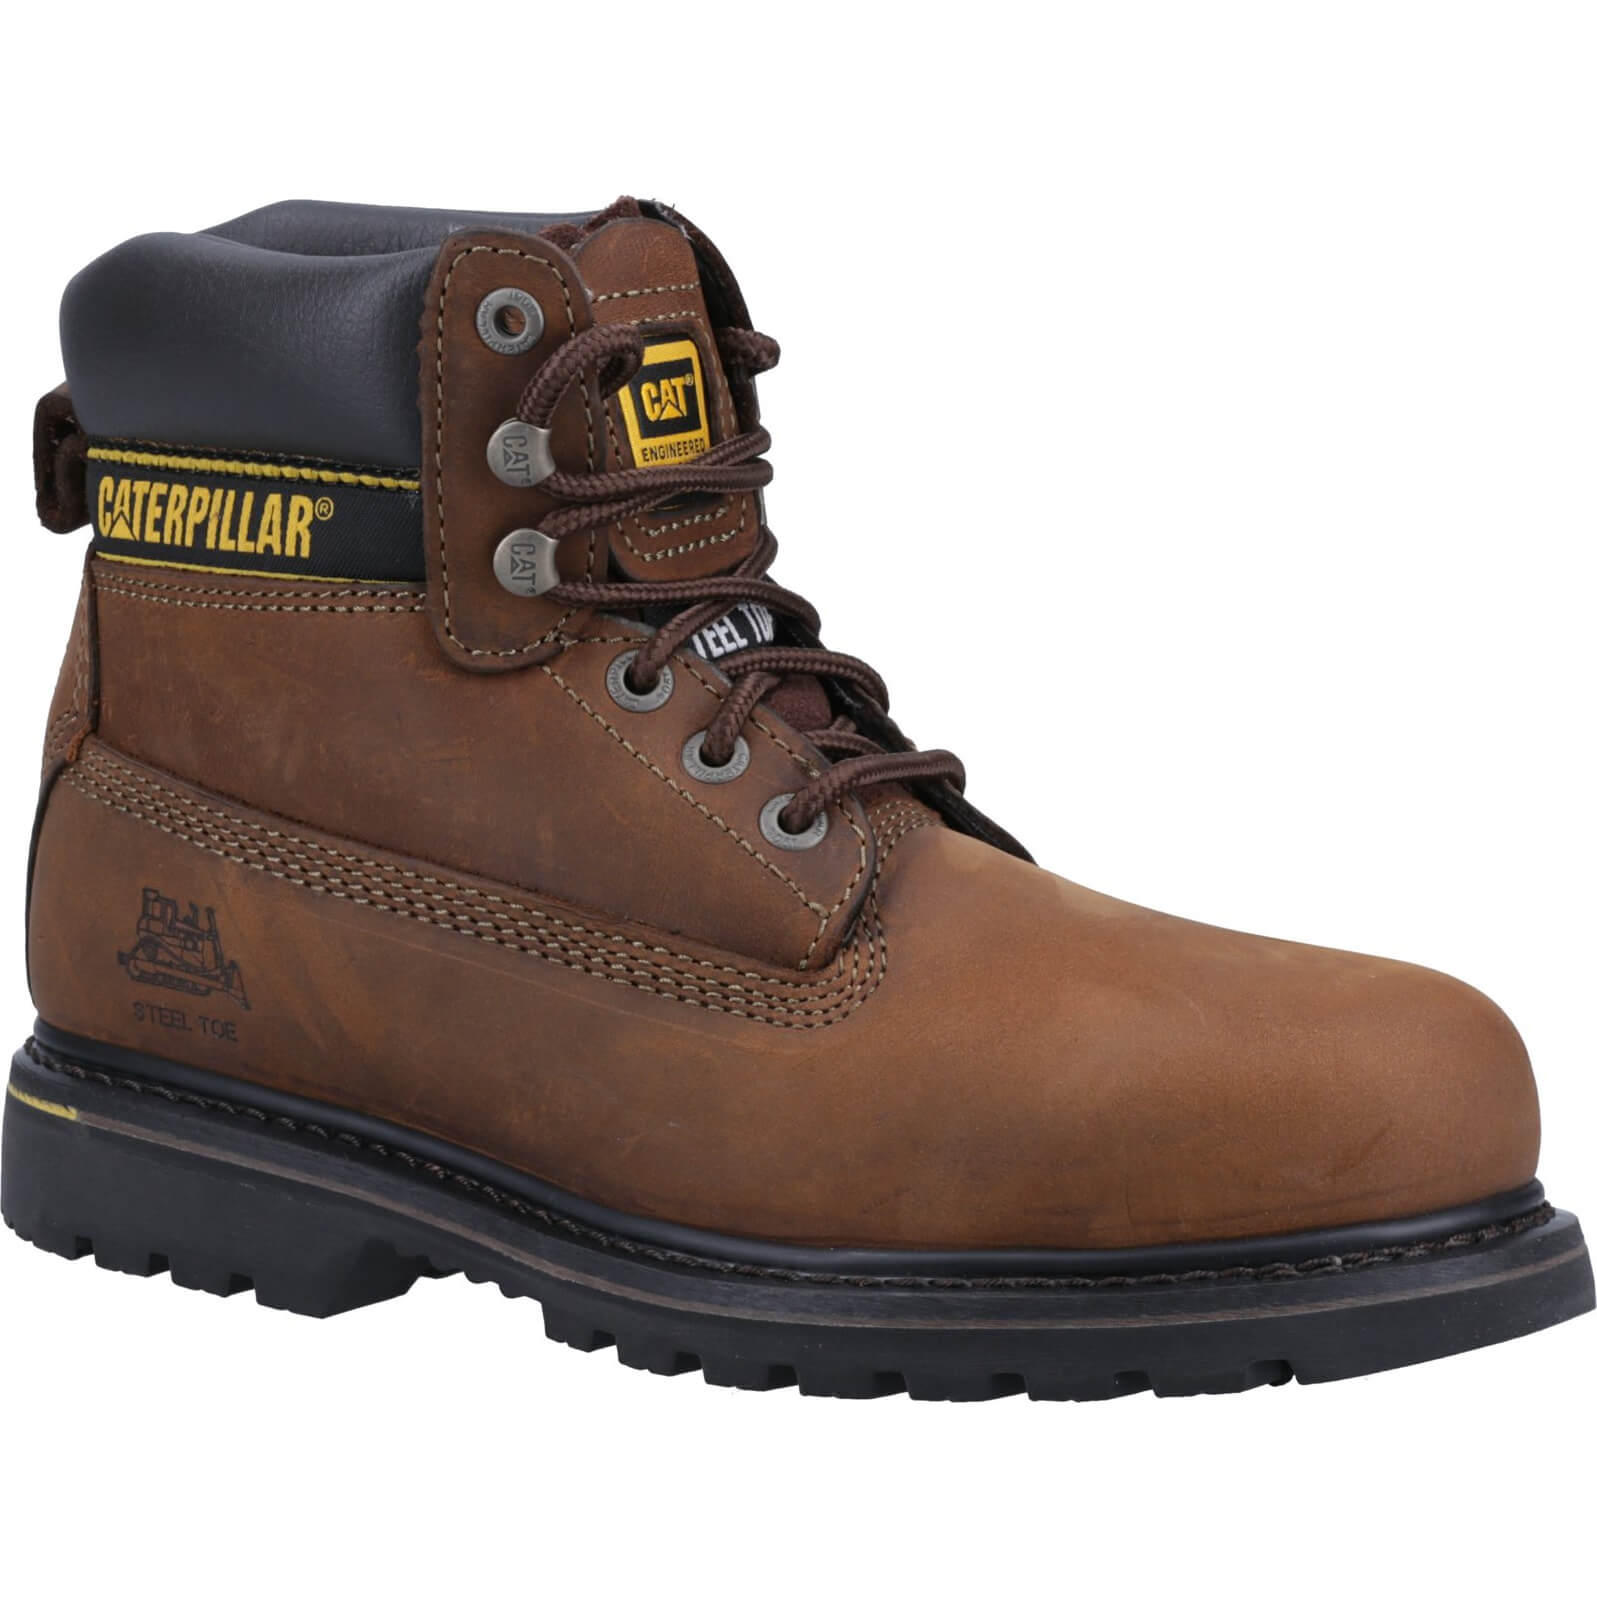 Caterpillar Mens Holton Safety Boots Brown Size 12